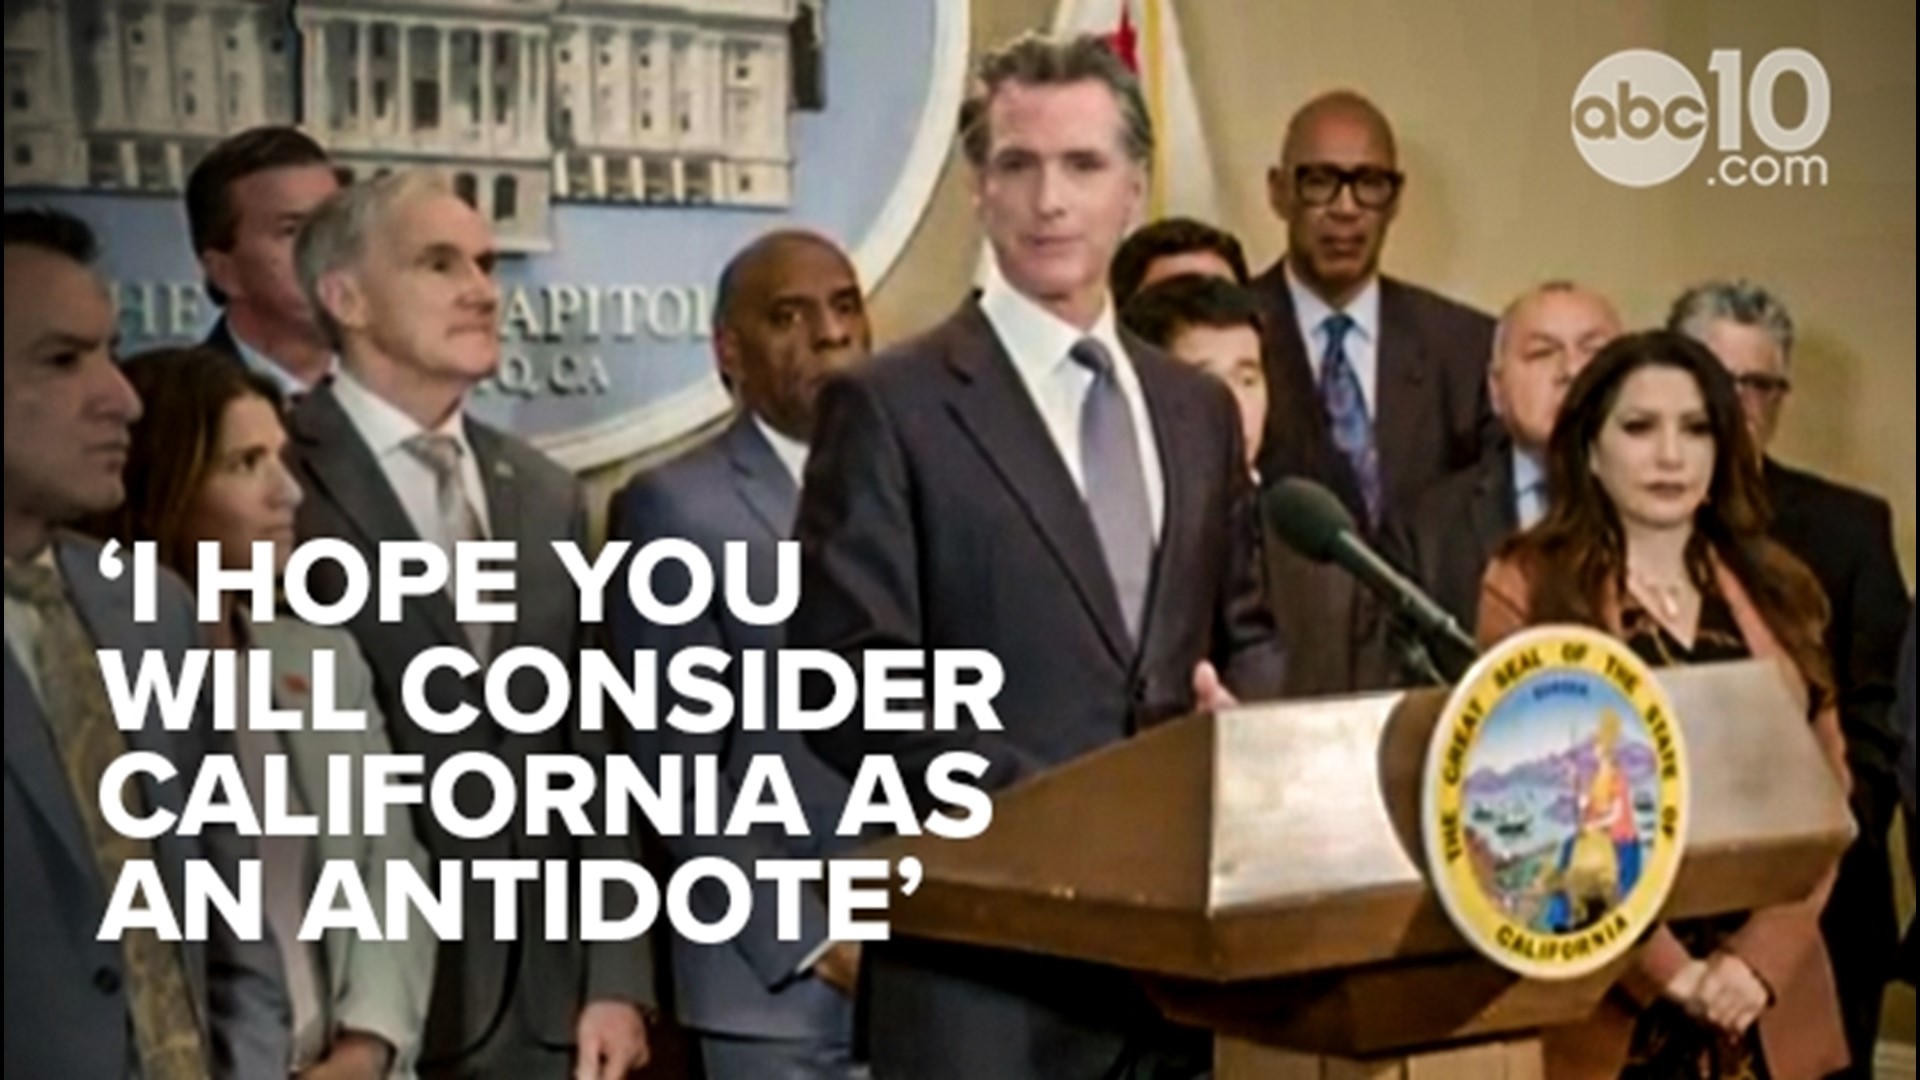 Gavin Newsom said progressive gun control policies are working in California, but he still wants to expedite some proposals from him and state Democrats.